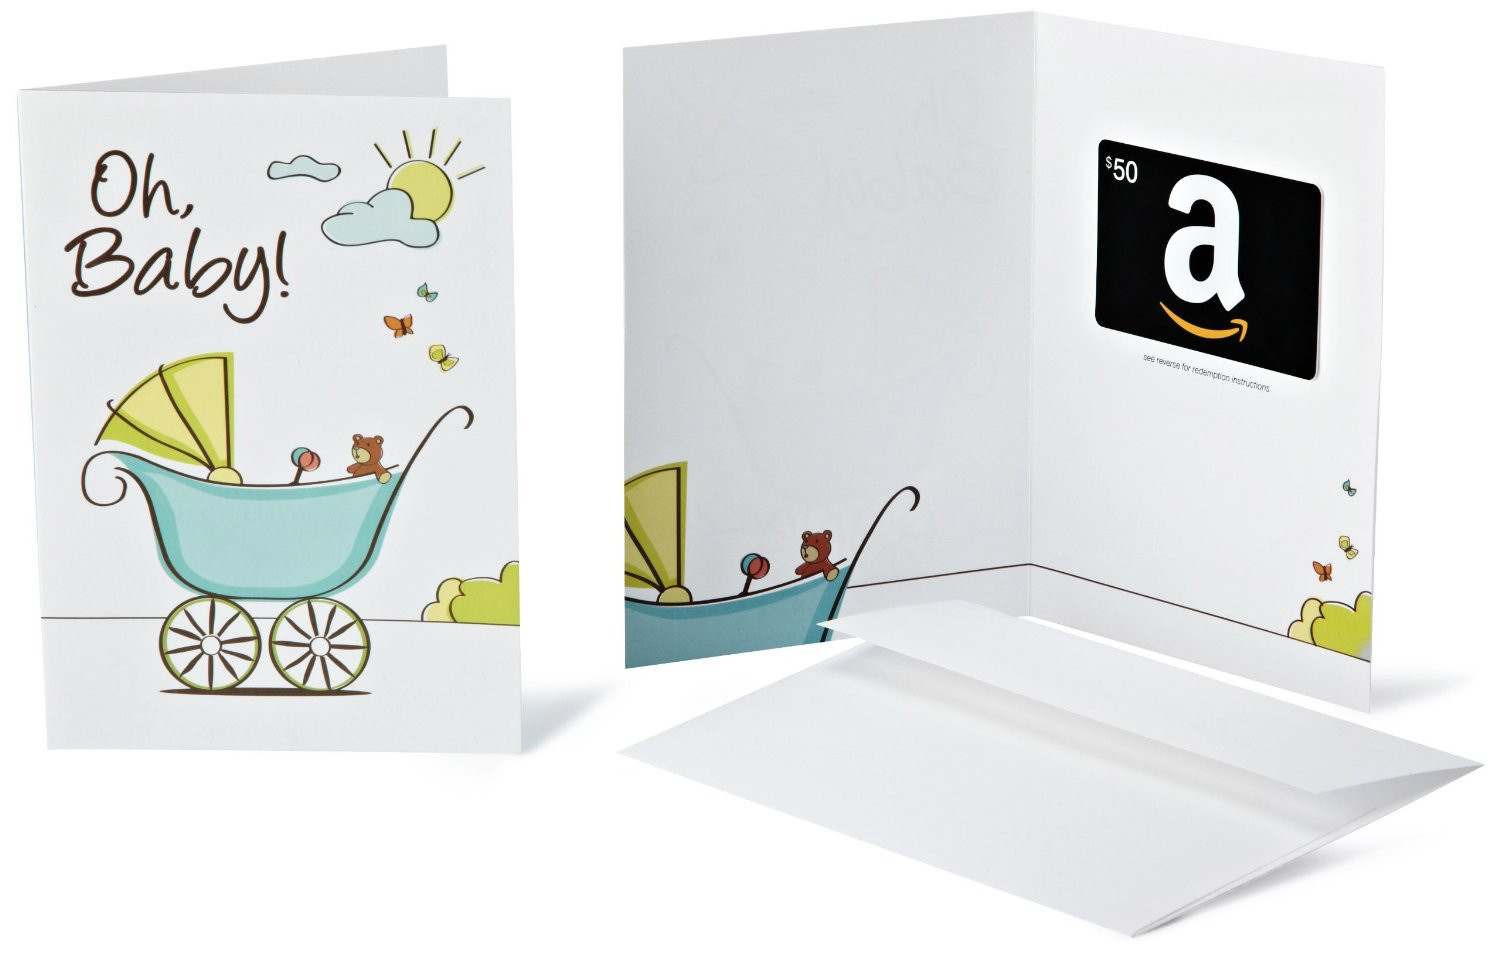 Baby Shower Gift Card Ideas
 100 Practical Indian Baby Shower Gift Ideas Under 30$